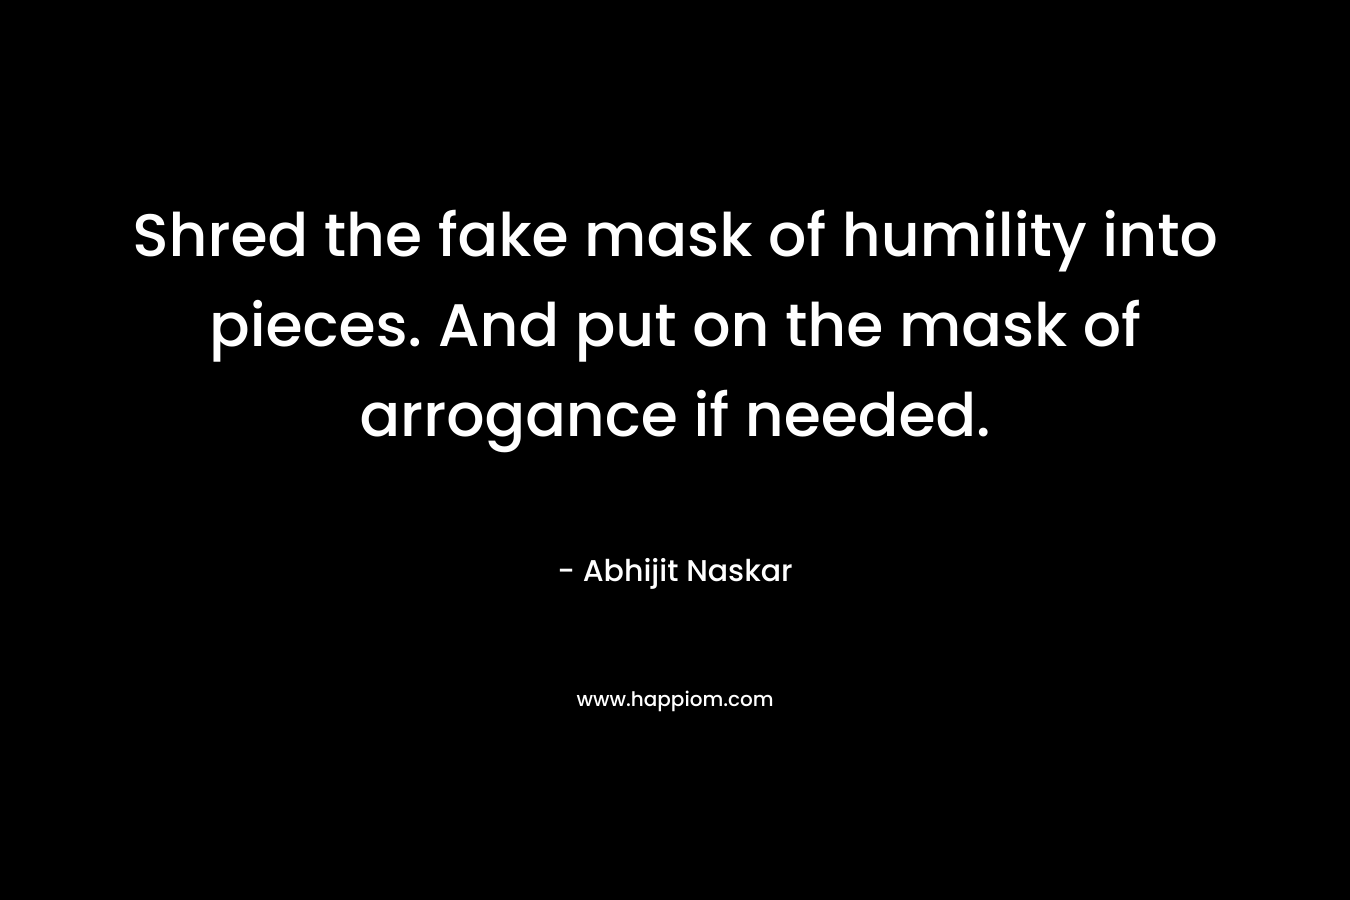 Shred the fake mask of humility into pieces. And put on the mask of arrogance if needed. – Abhijit Naskar